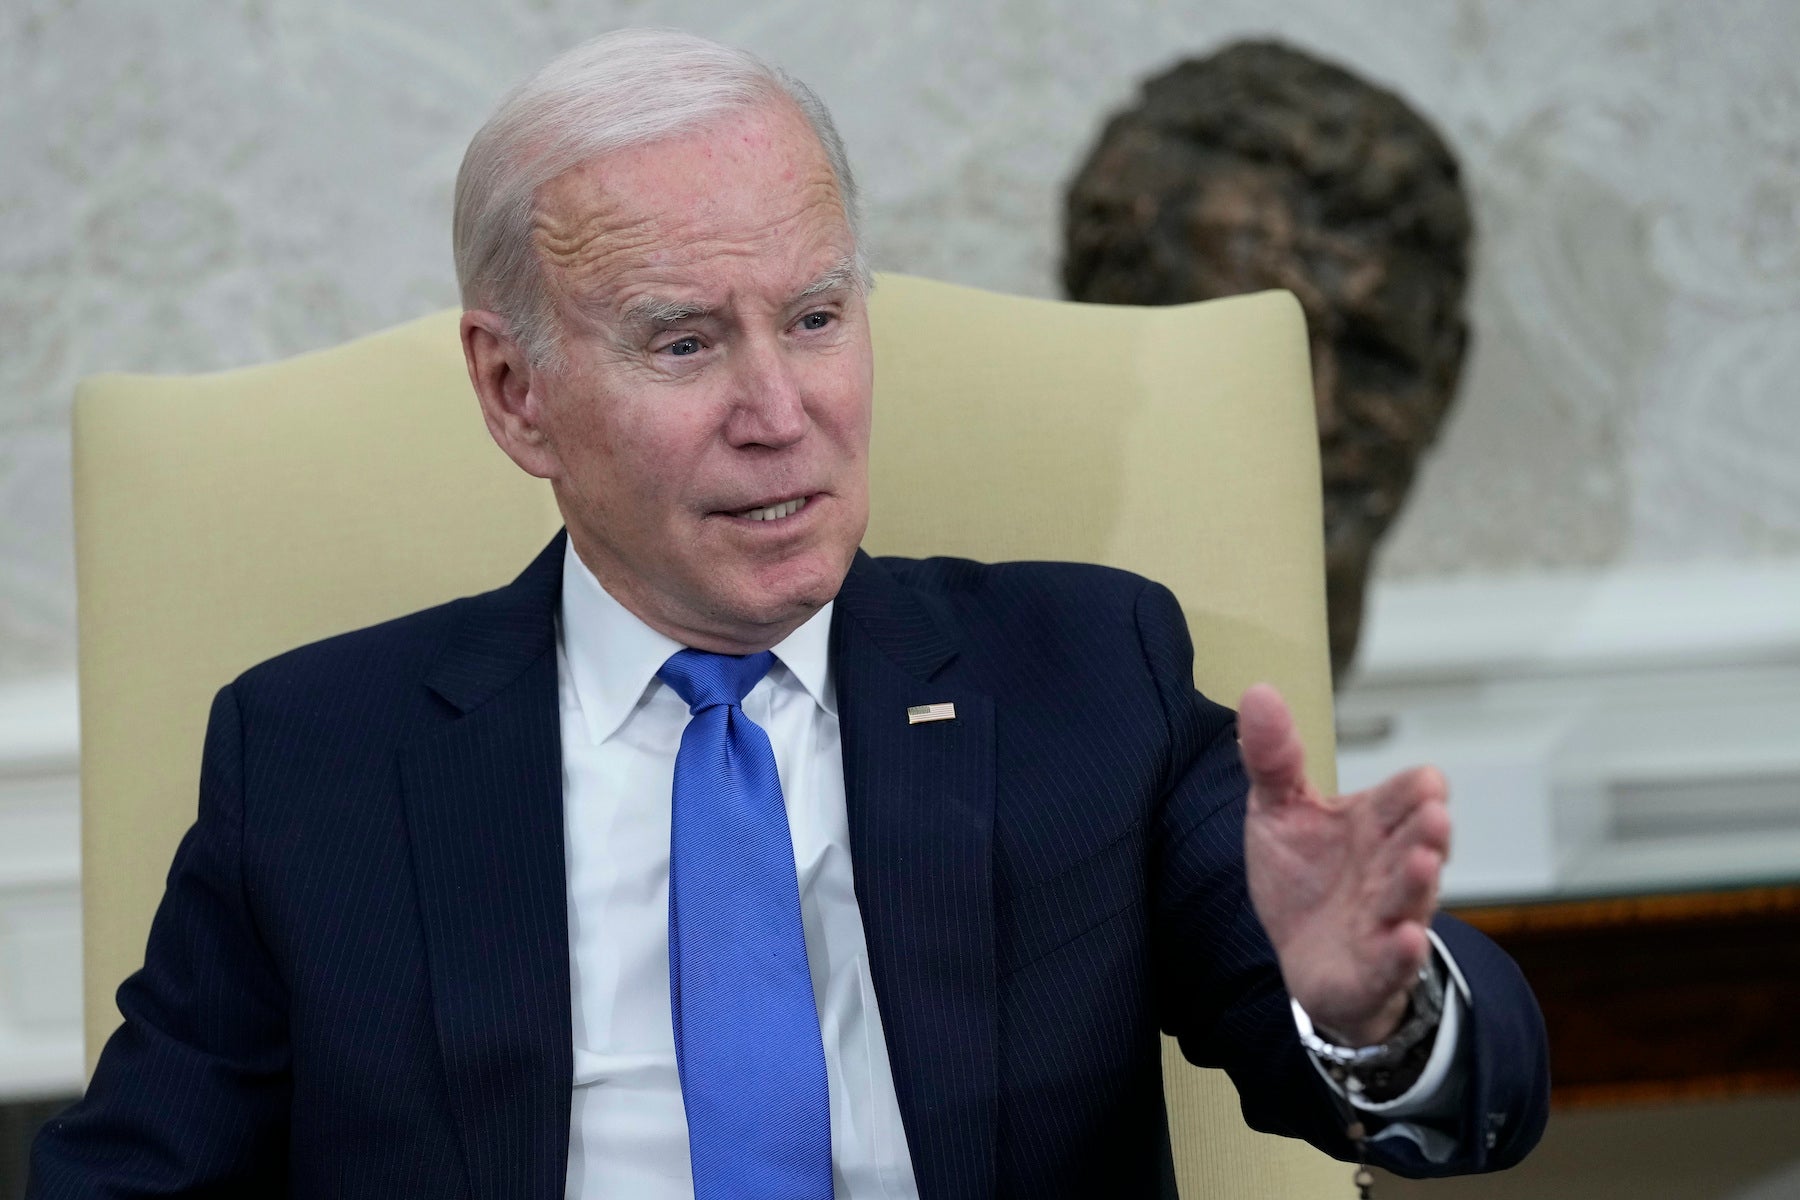 Faldgruber Selskabelig pistol Biden visits Philly to announce water upgrades, lead pipe removal - WHYY